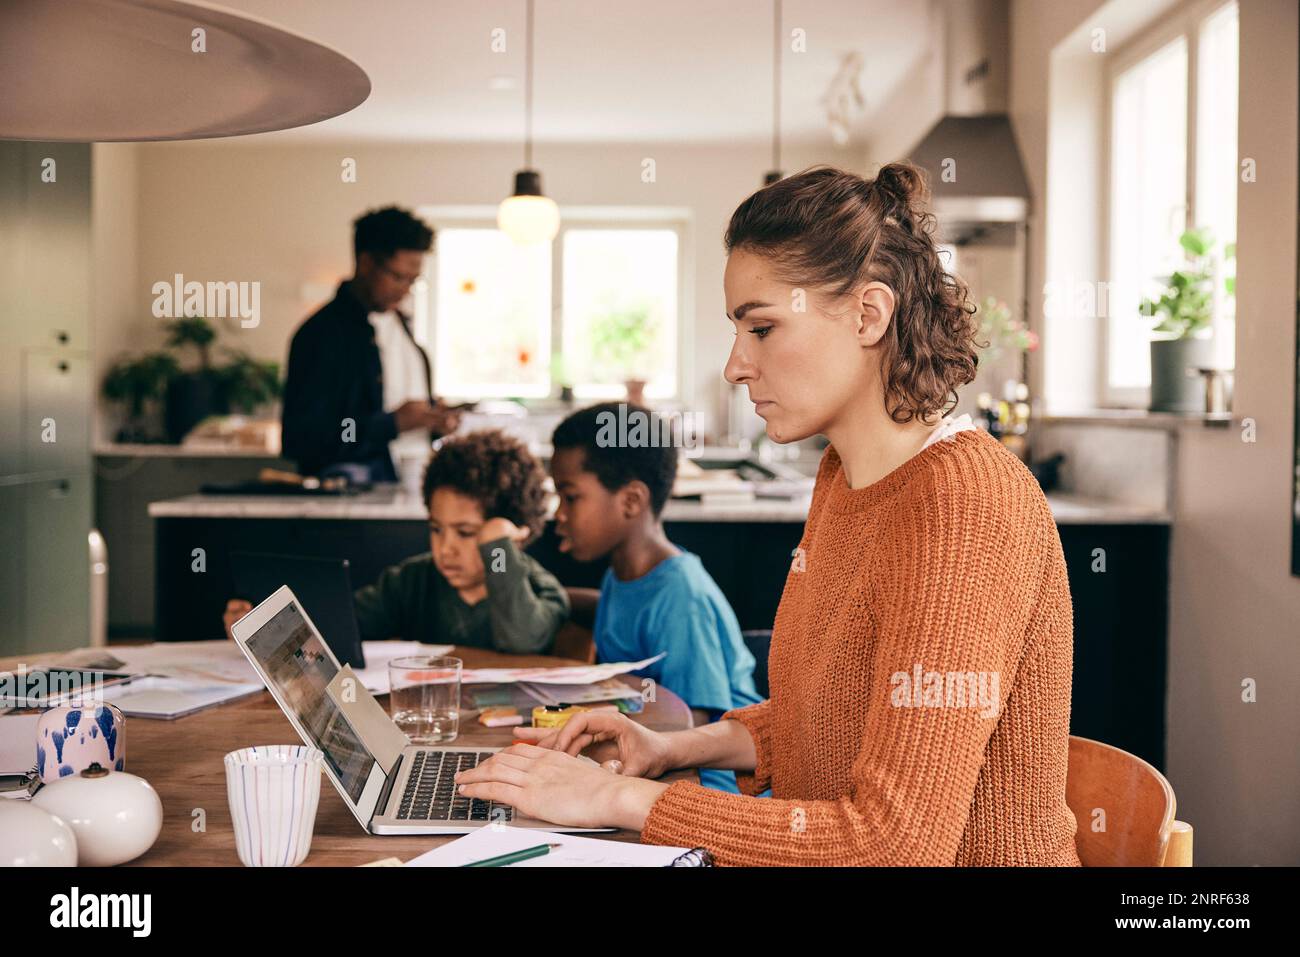 Side view of woman using laptop while family in background at home Stock Photo